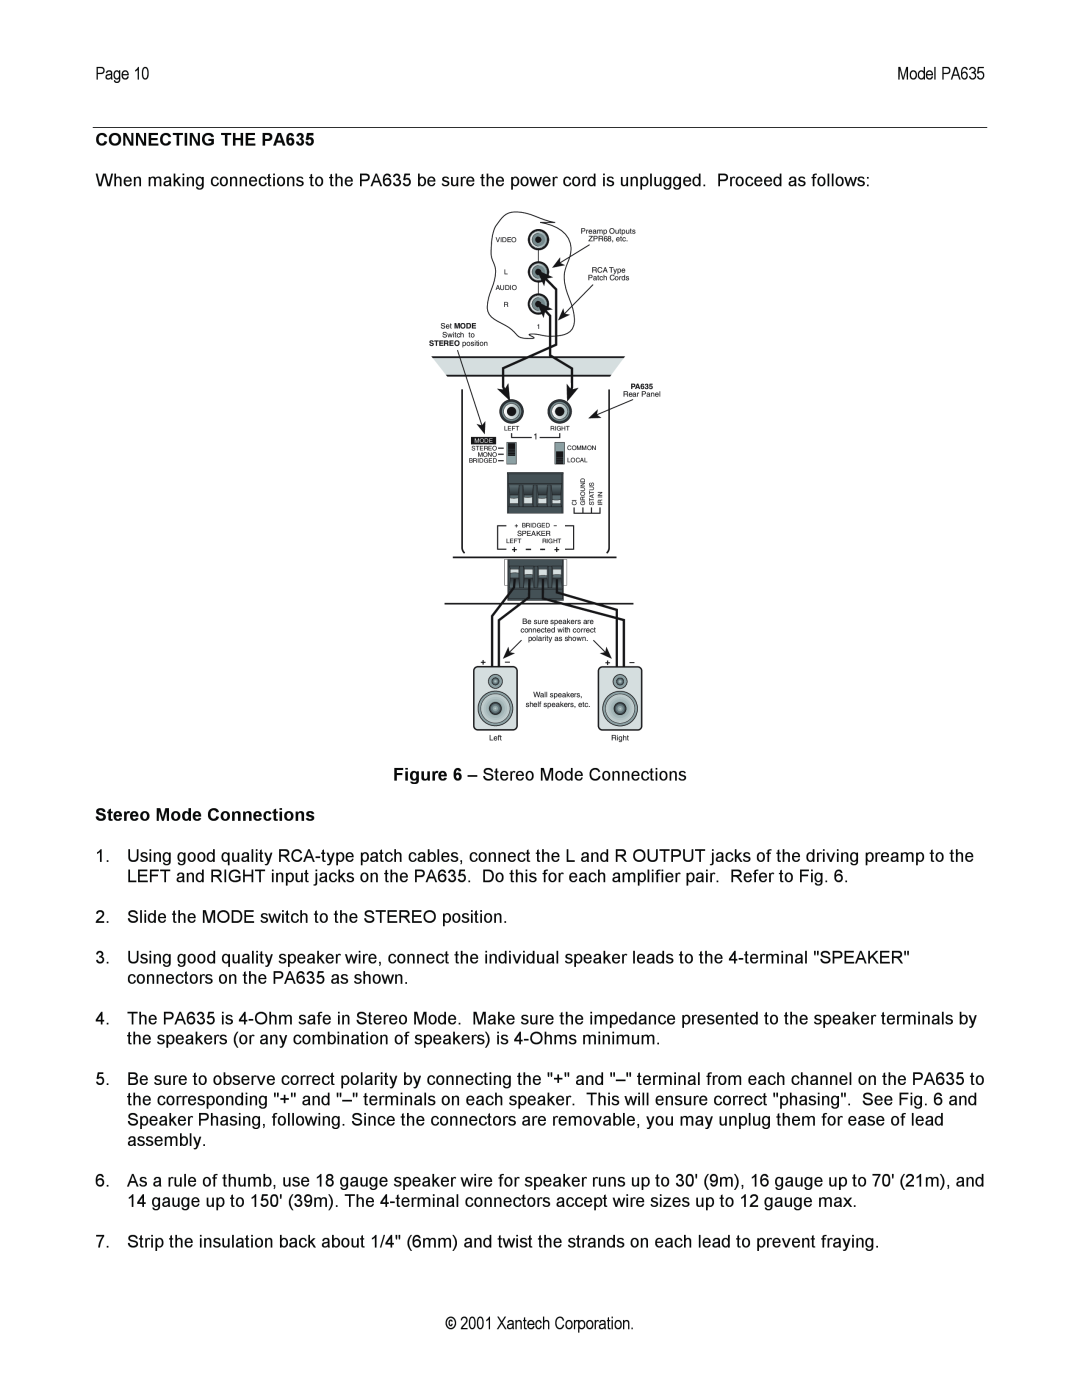 Xantech installation instructions CONNECTING THE PA635, Stereo Mode Connections, Left, Right 